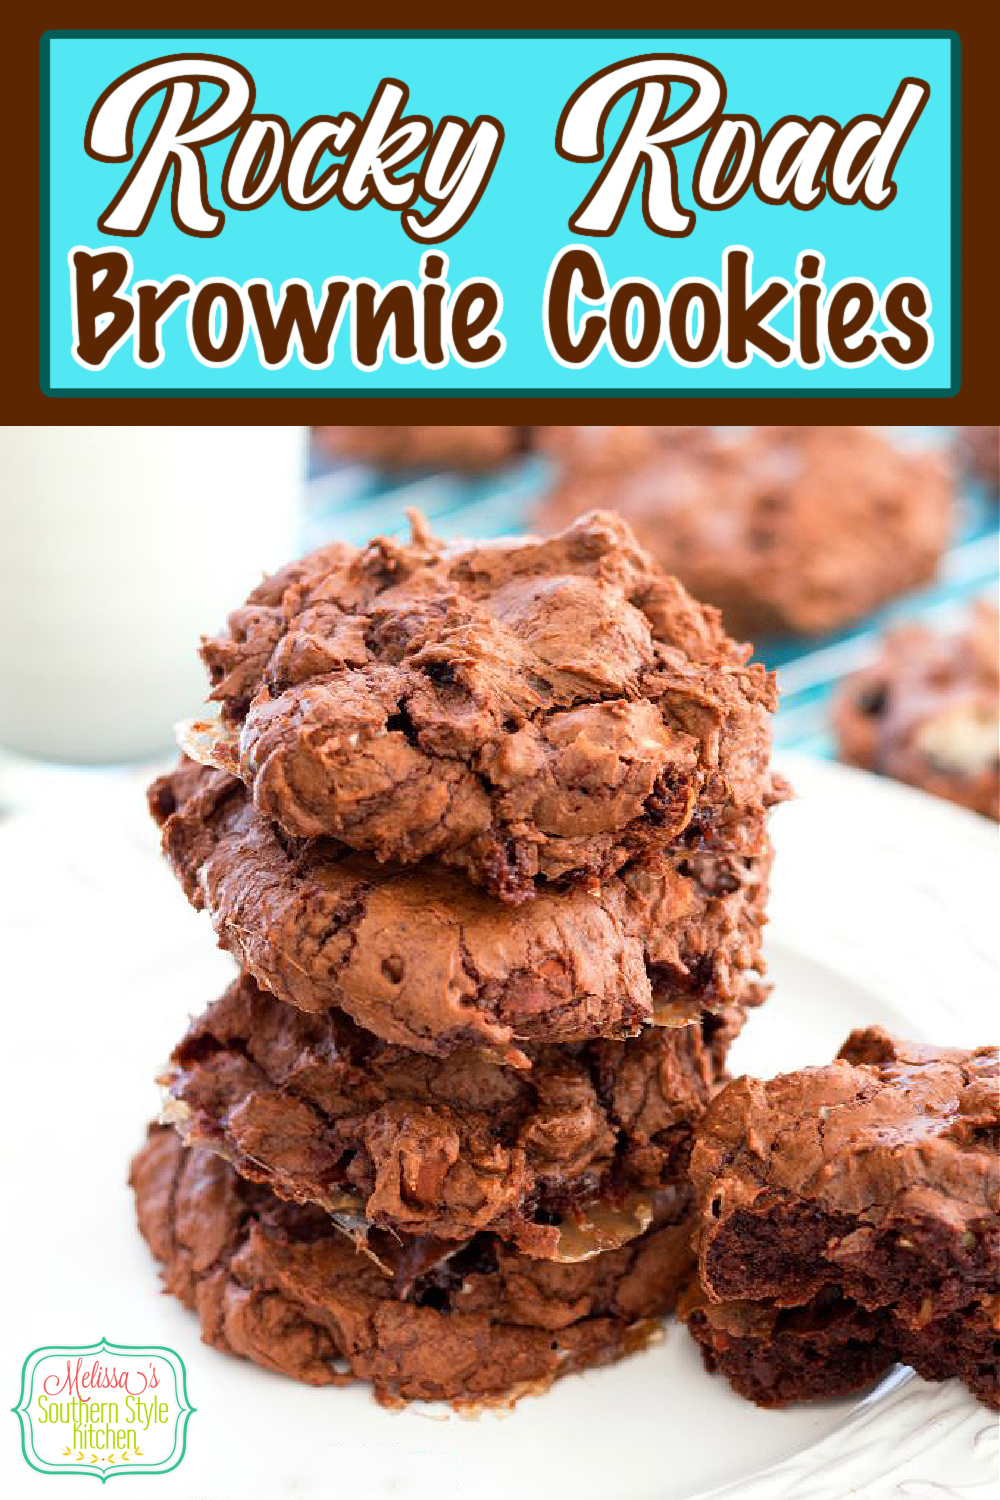 Brownies and rocky road candy collide in these fudgy  Rocky Road Brownie Cookies #browniecookies #rockyroad #rockyroadbrowniecookies #cookies #cookierecipes #desserts #dessertfoodrecipes #christmascookies #southernrecipes via @melissasssk